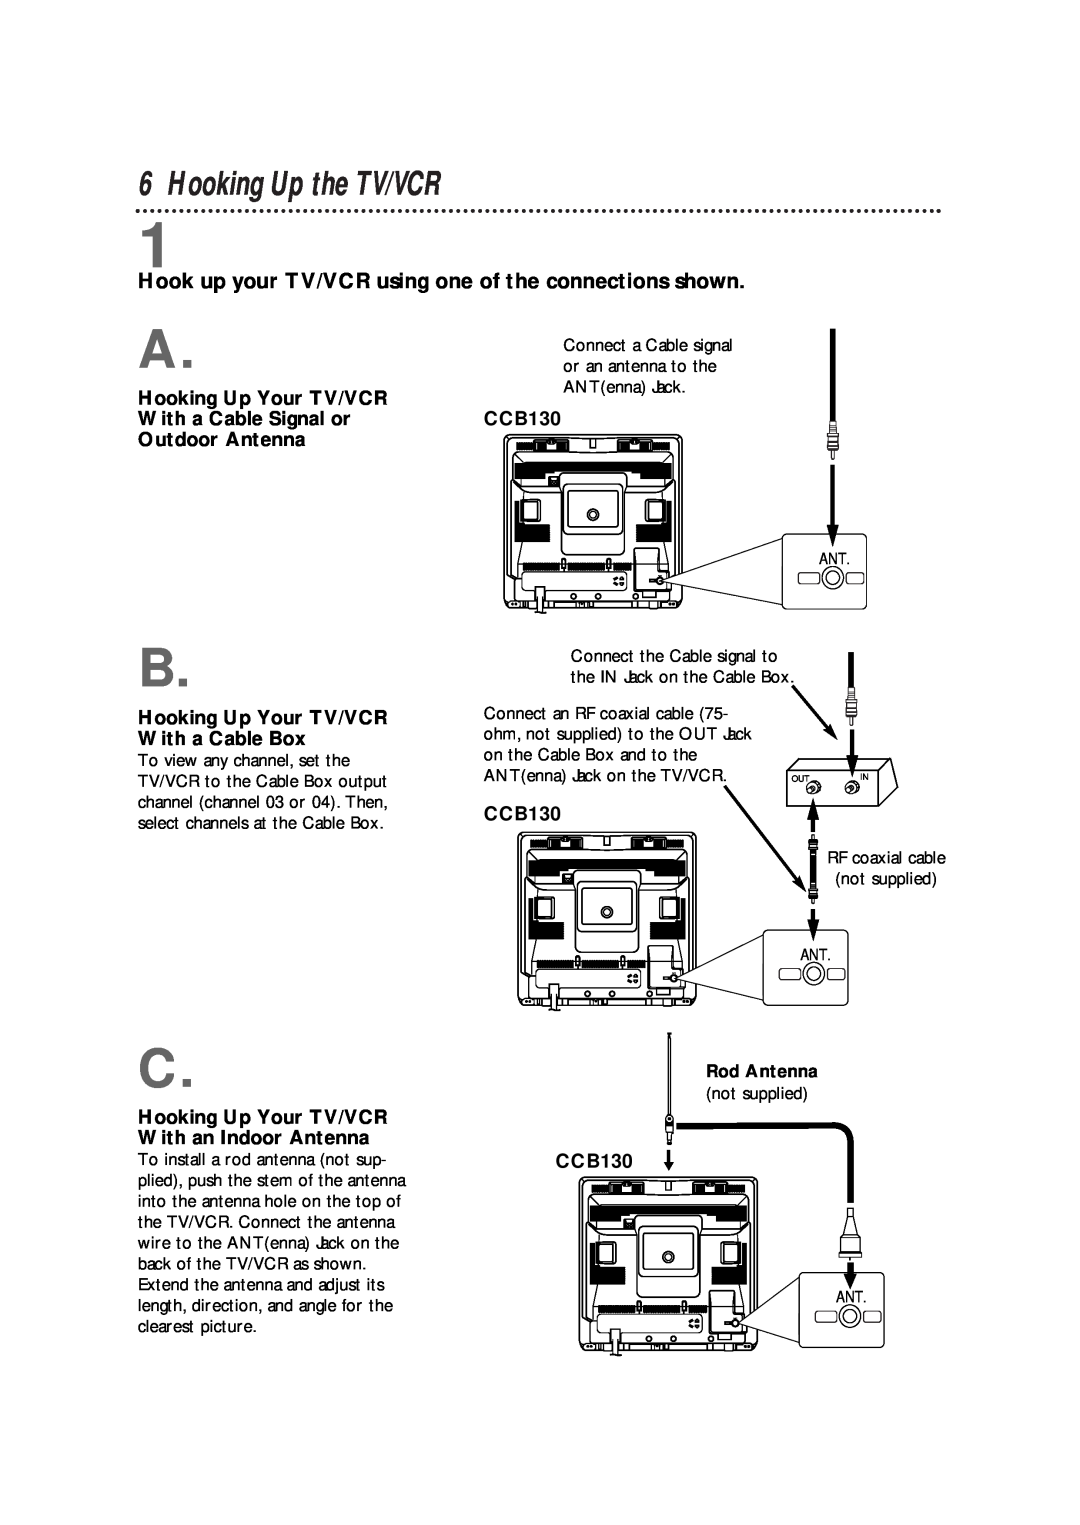 Philips CCB 132AT, CCB 192AT Hooking Up the TV/VCR, Hook up your TV/VCR using one of the connections shown, CCB130 